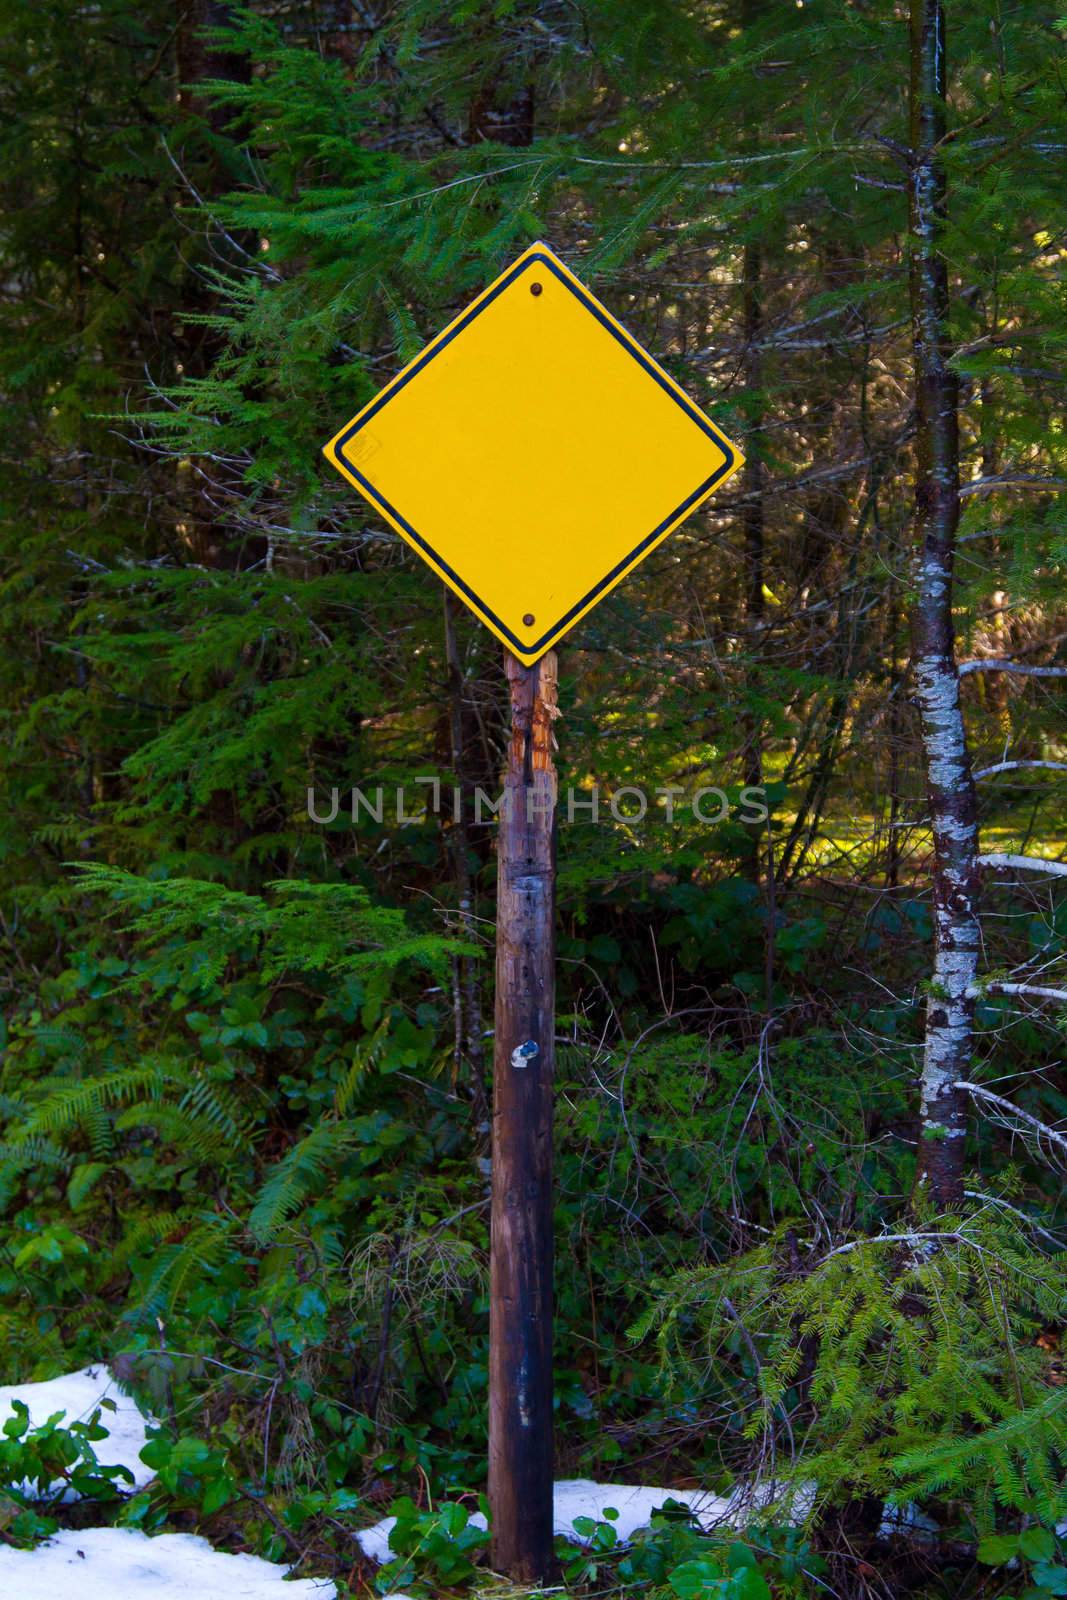 A yellow caution sign has no letters on it and is ready for the text of a designer. This is a typical road sign diamond shape in the woods.